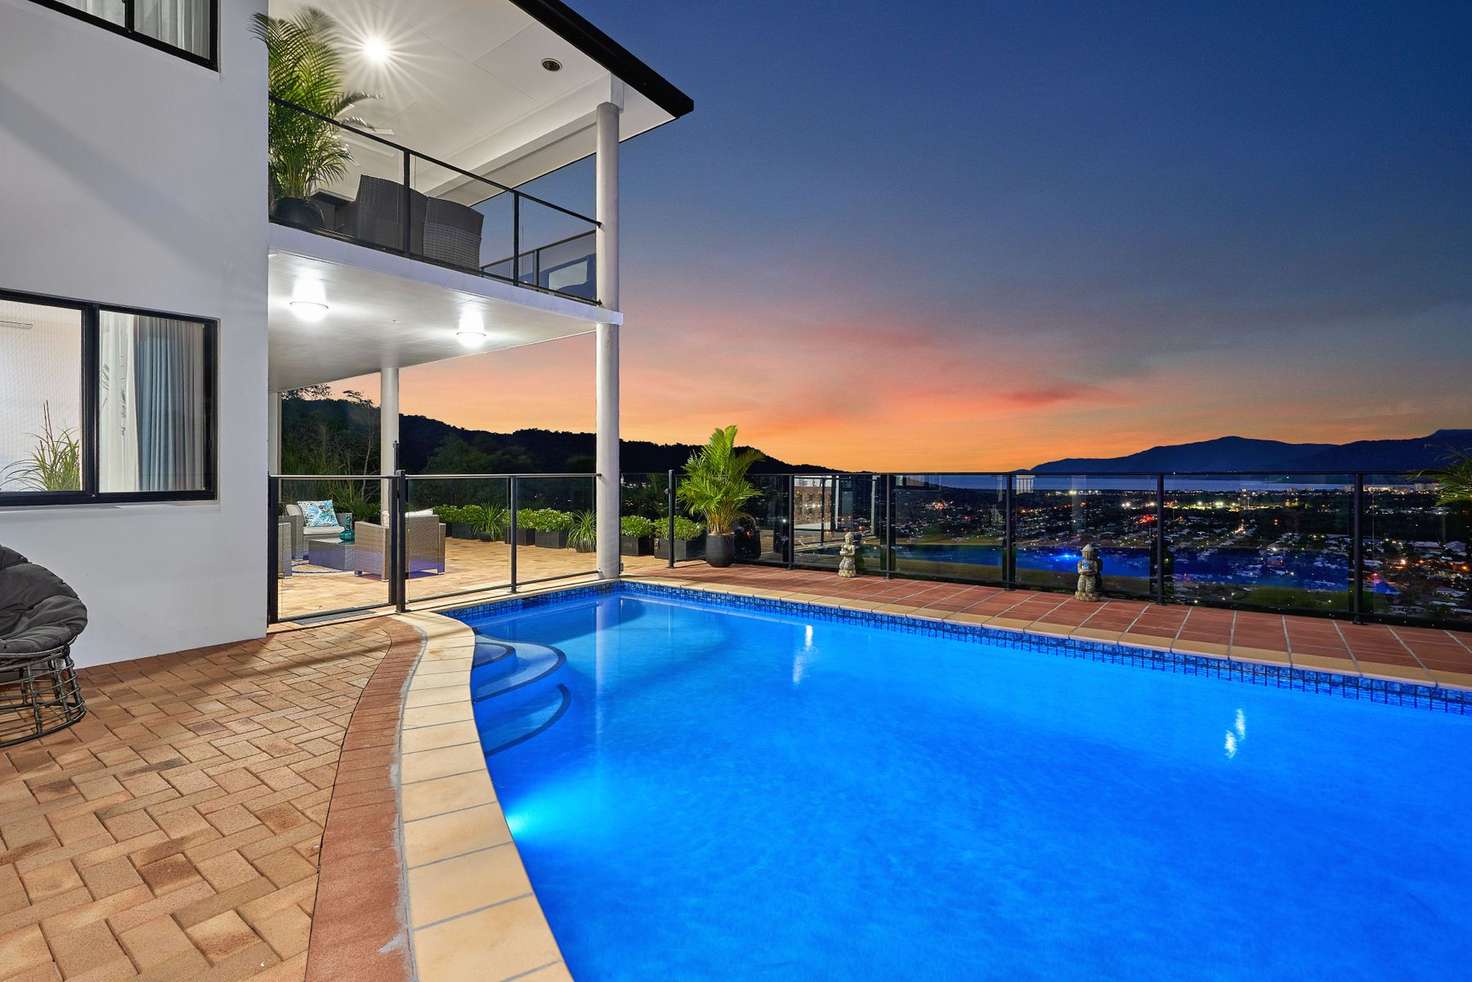 Main view of Homely house listing, 18 The Peak Road, Brinsmead QLD 4870